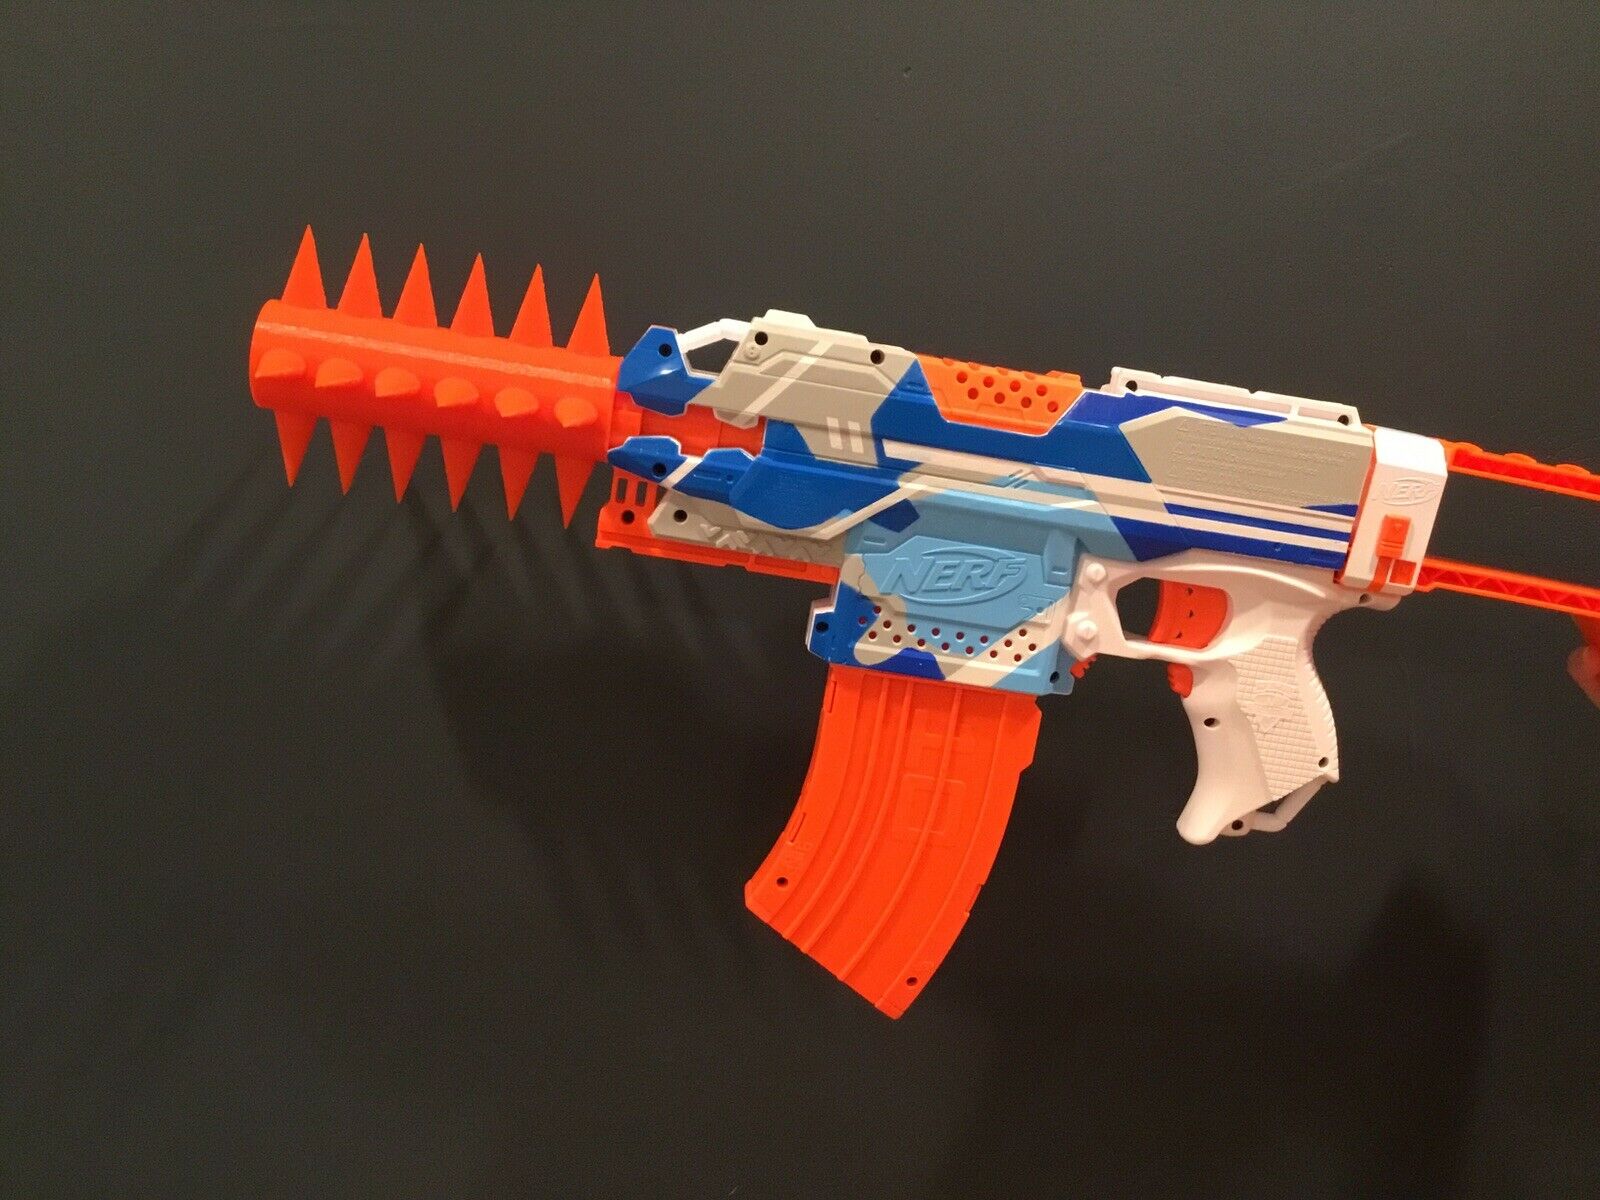 Tactical SPIKED Barrel On Extension Nerf Modulus More – So With It